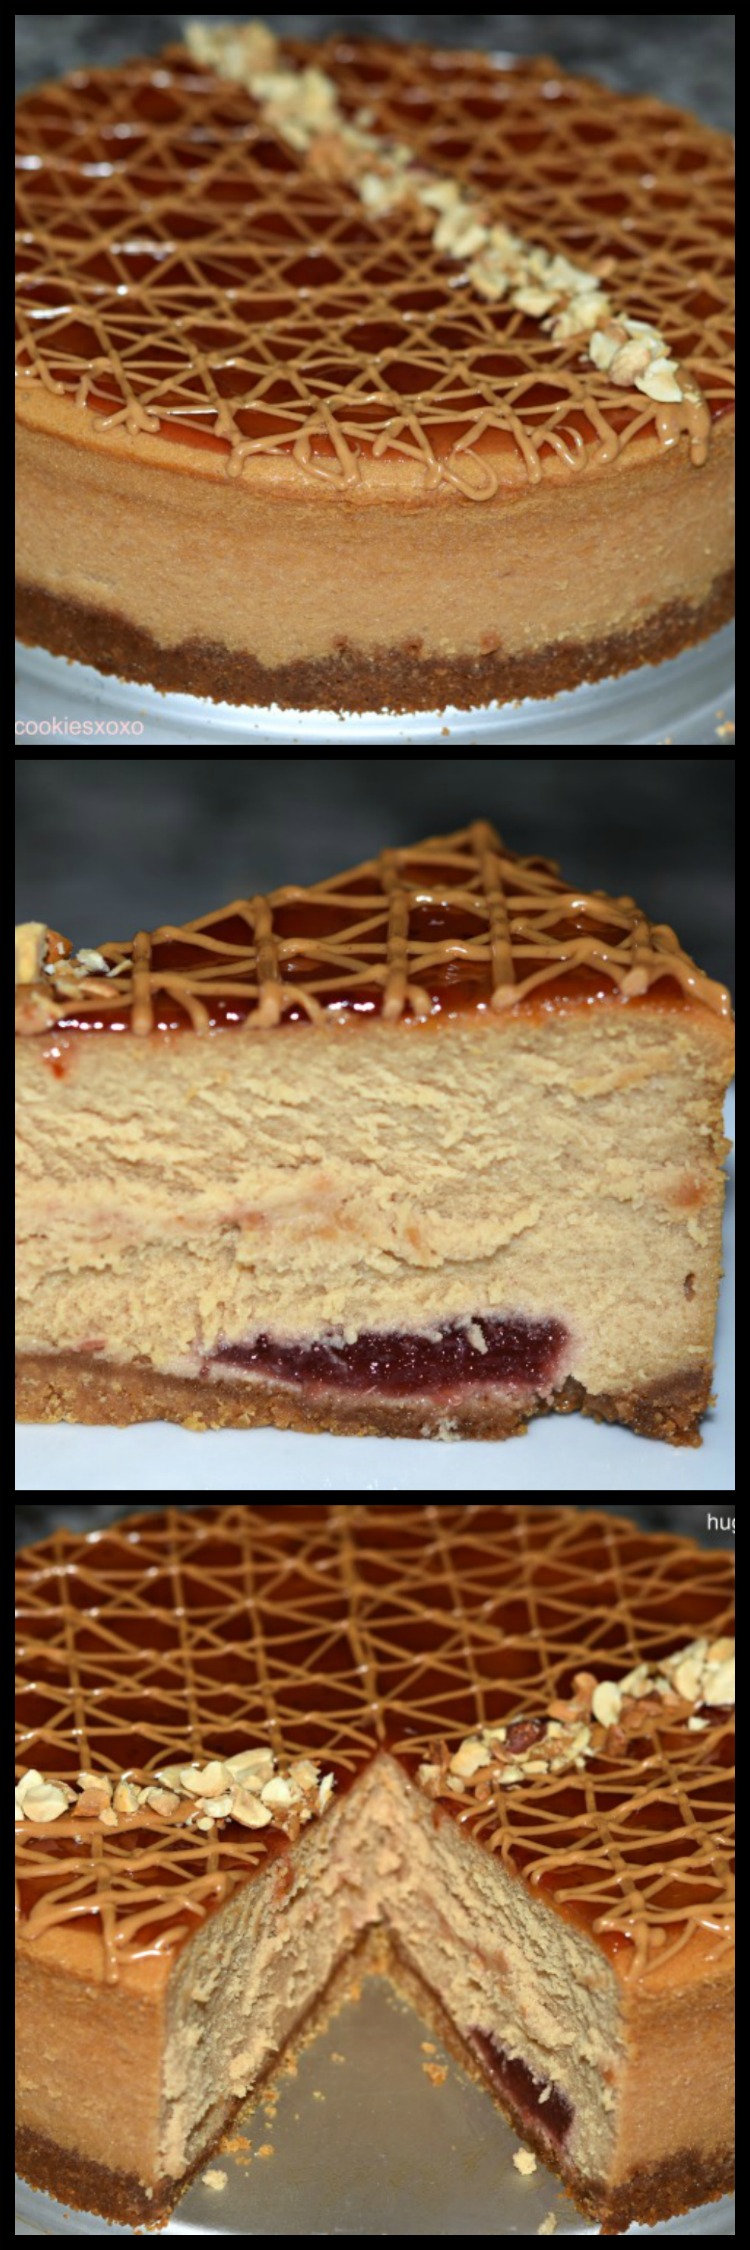 Peanut Butter and Jelly Cheesecake